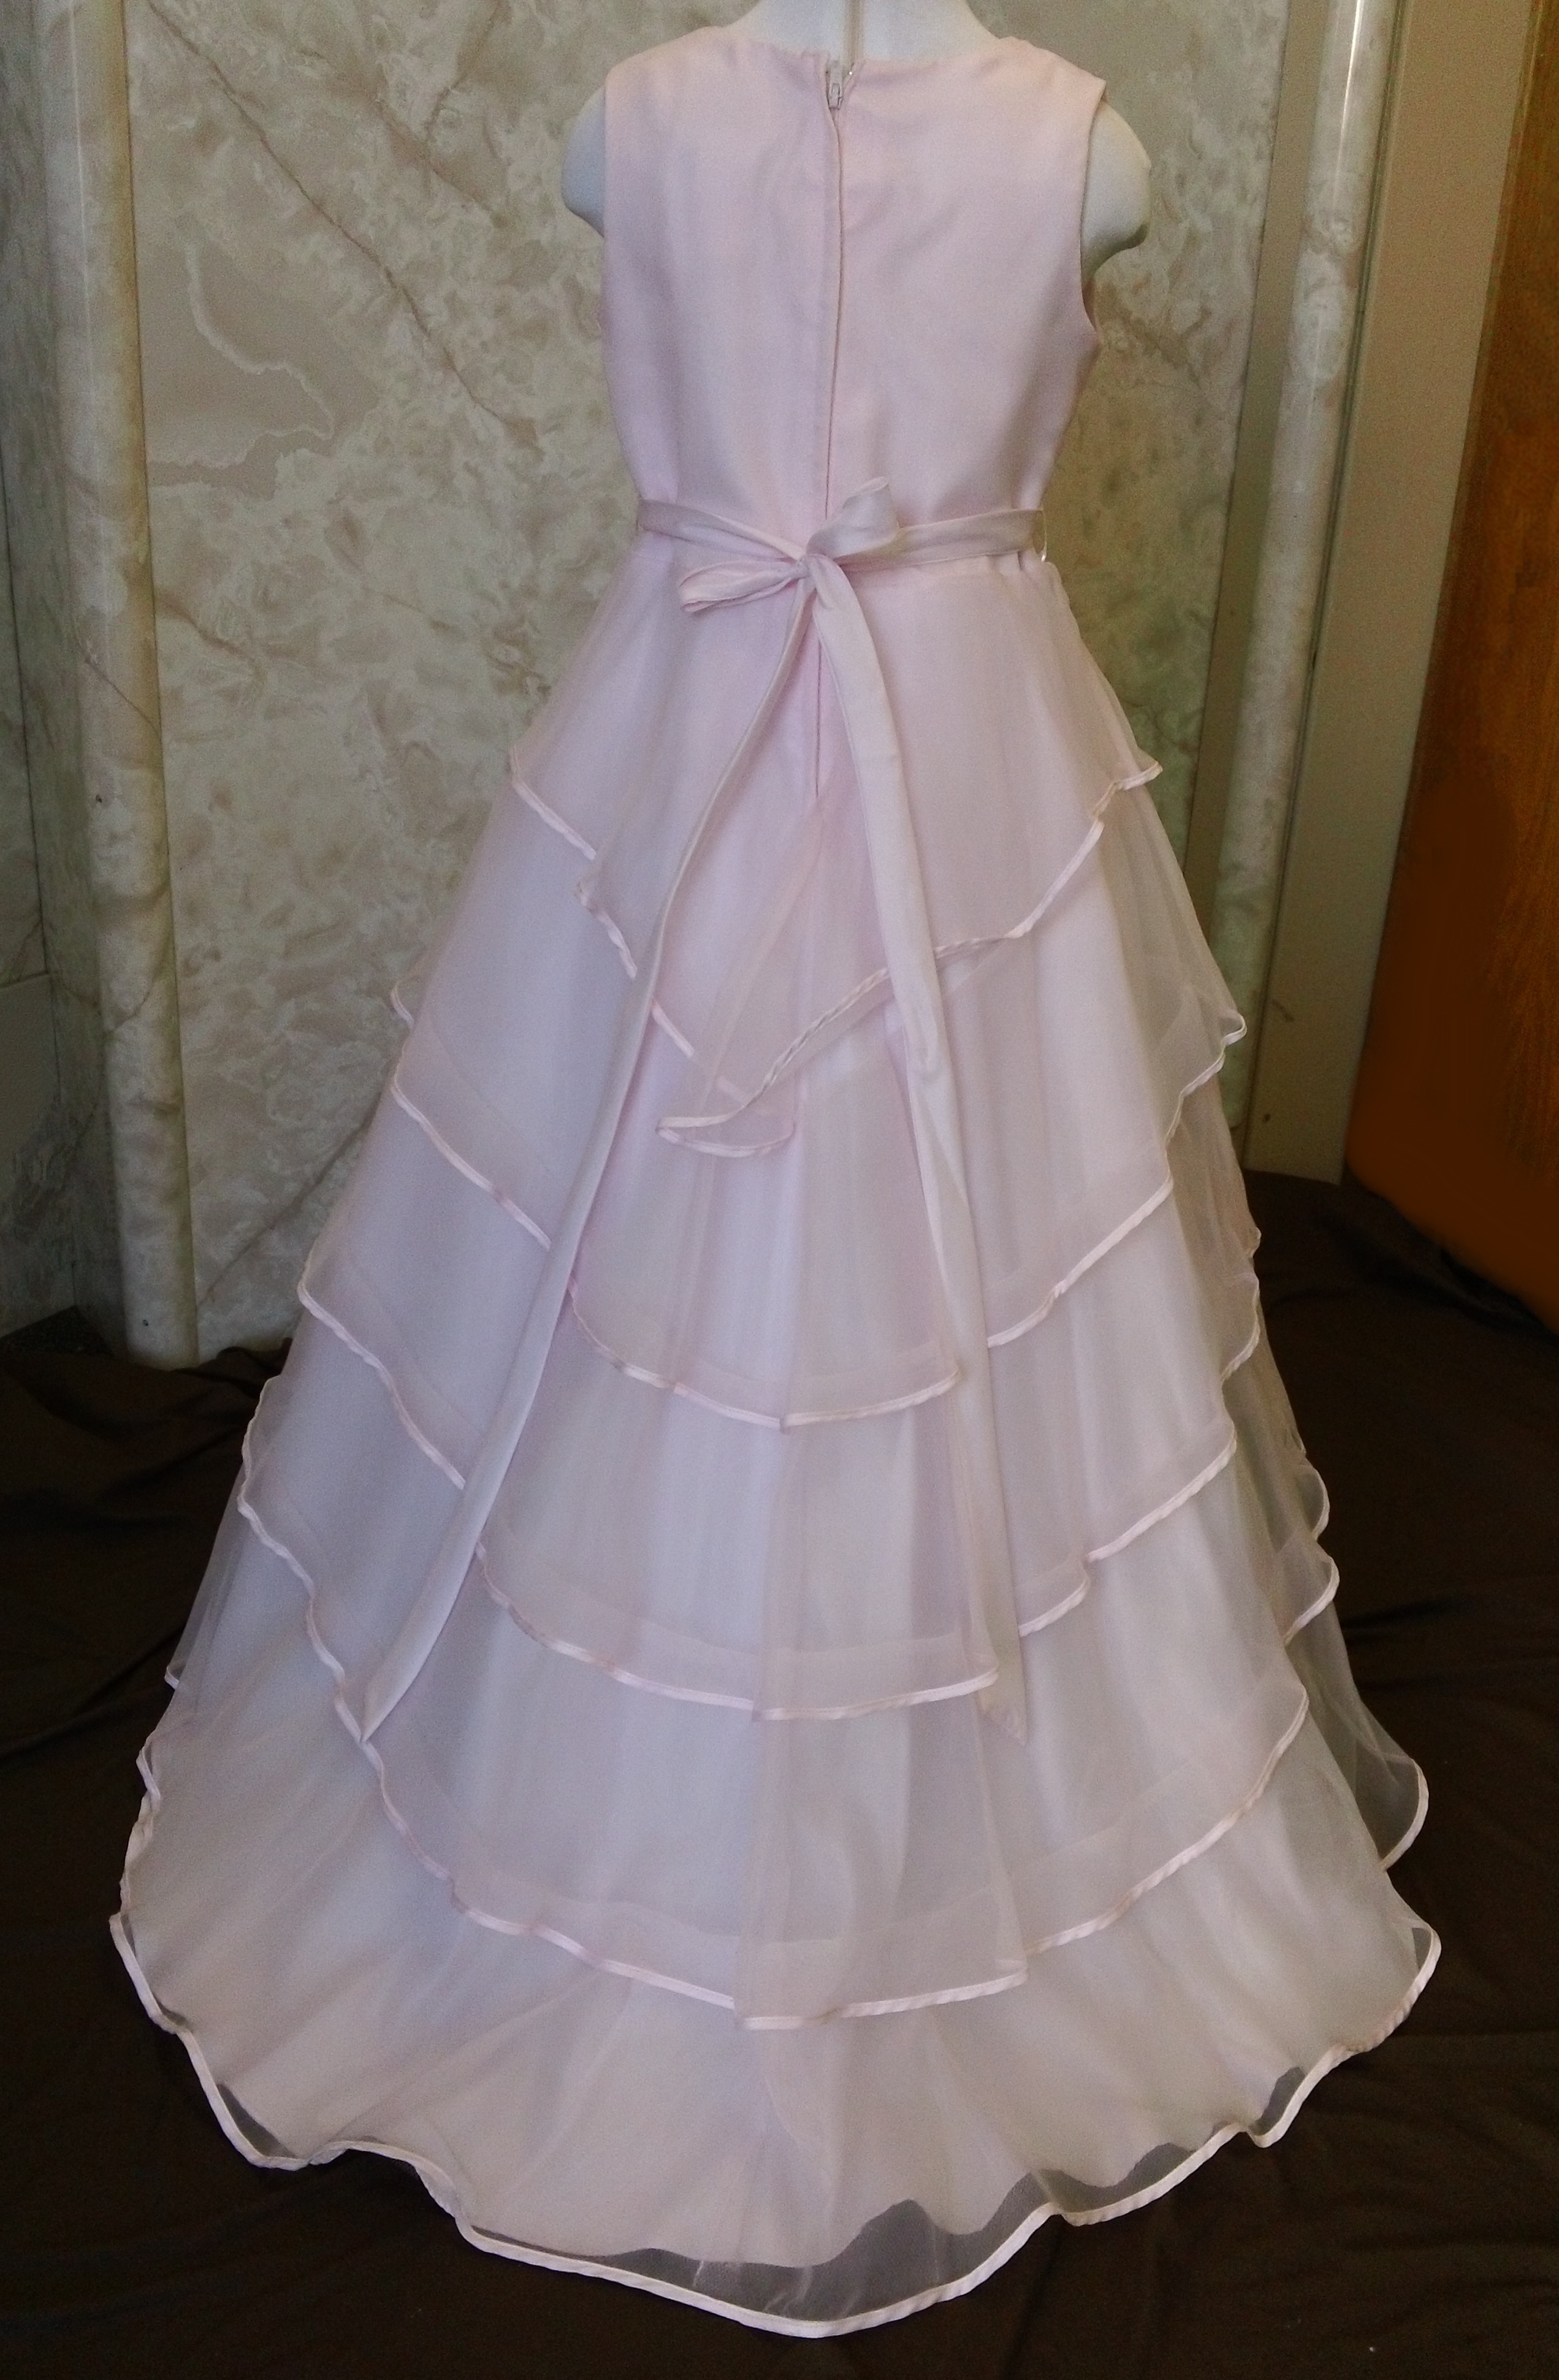 Long sleeveless girls pink dress with 5 tier skirt.  Zipper back, with tie sash.